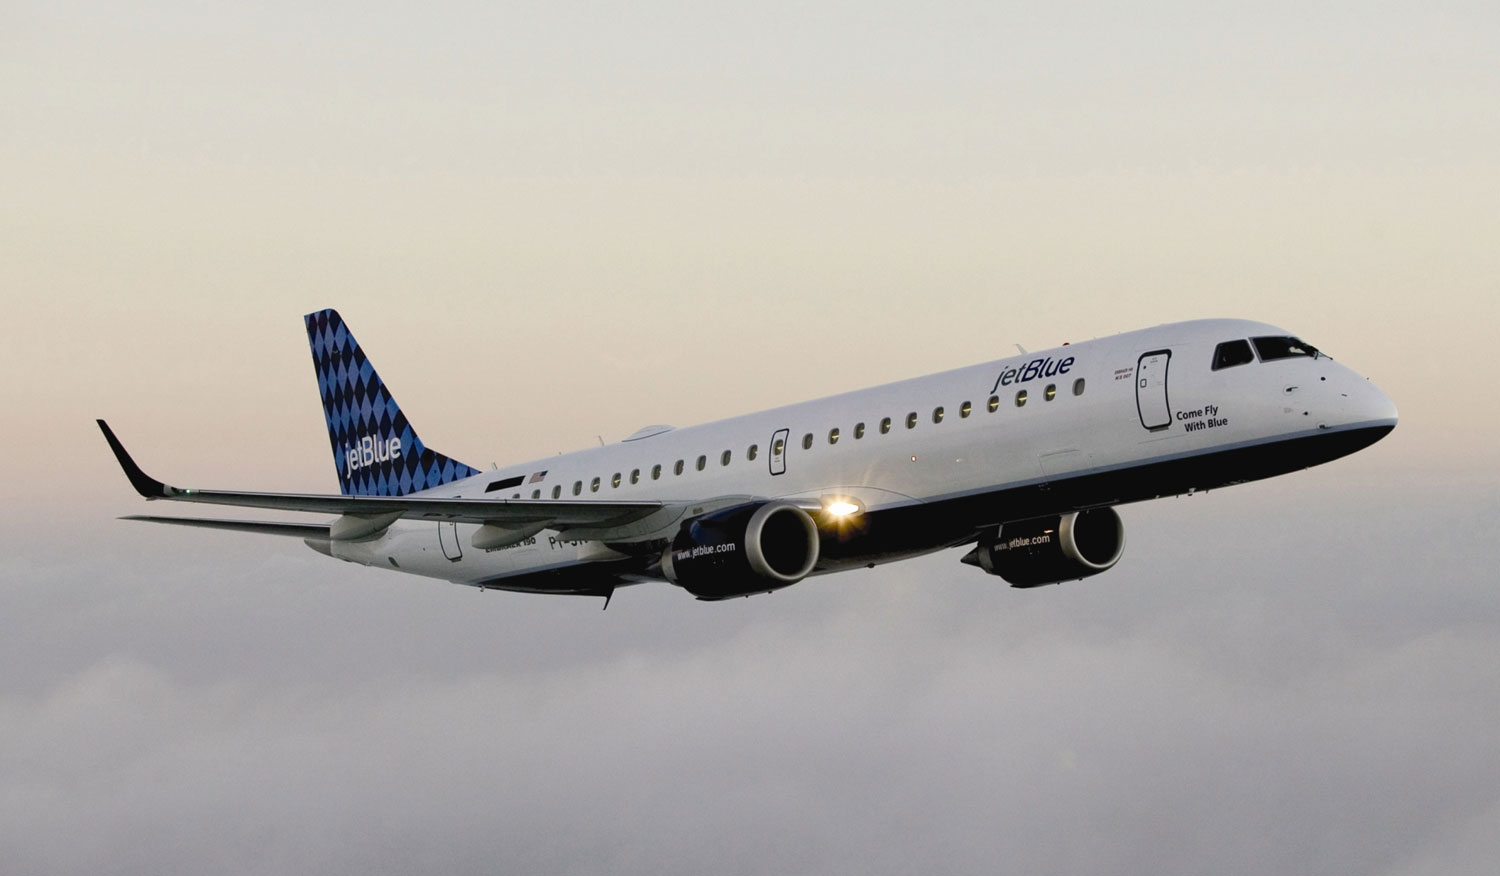 JetBlue takes delivery of First Embraer 190